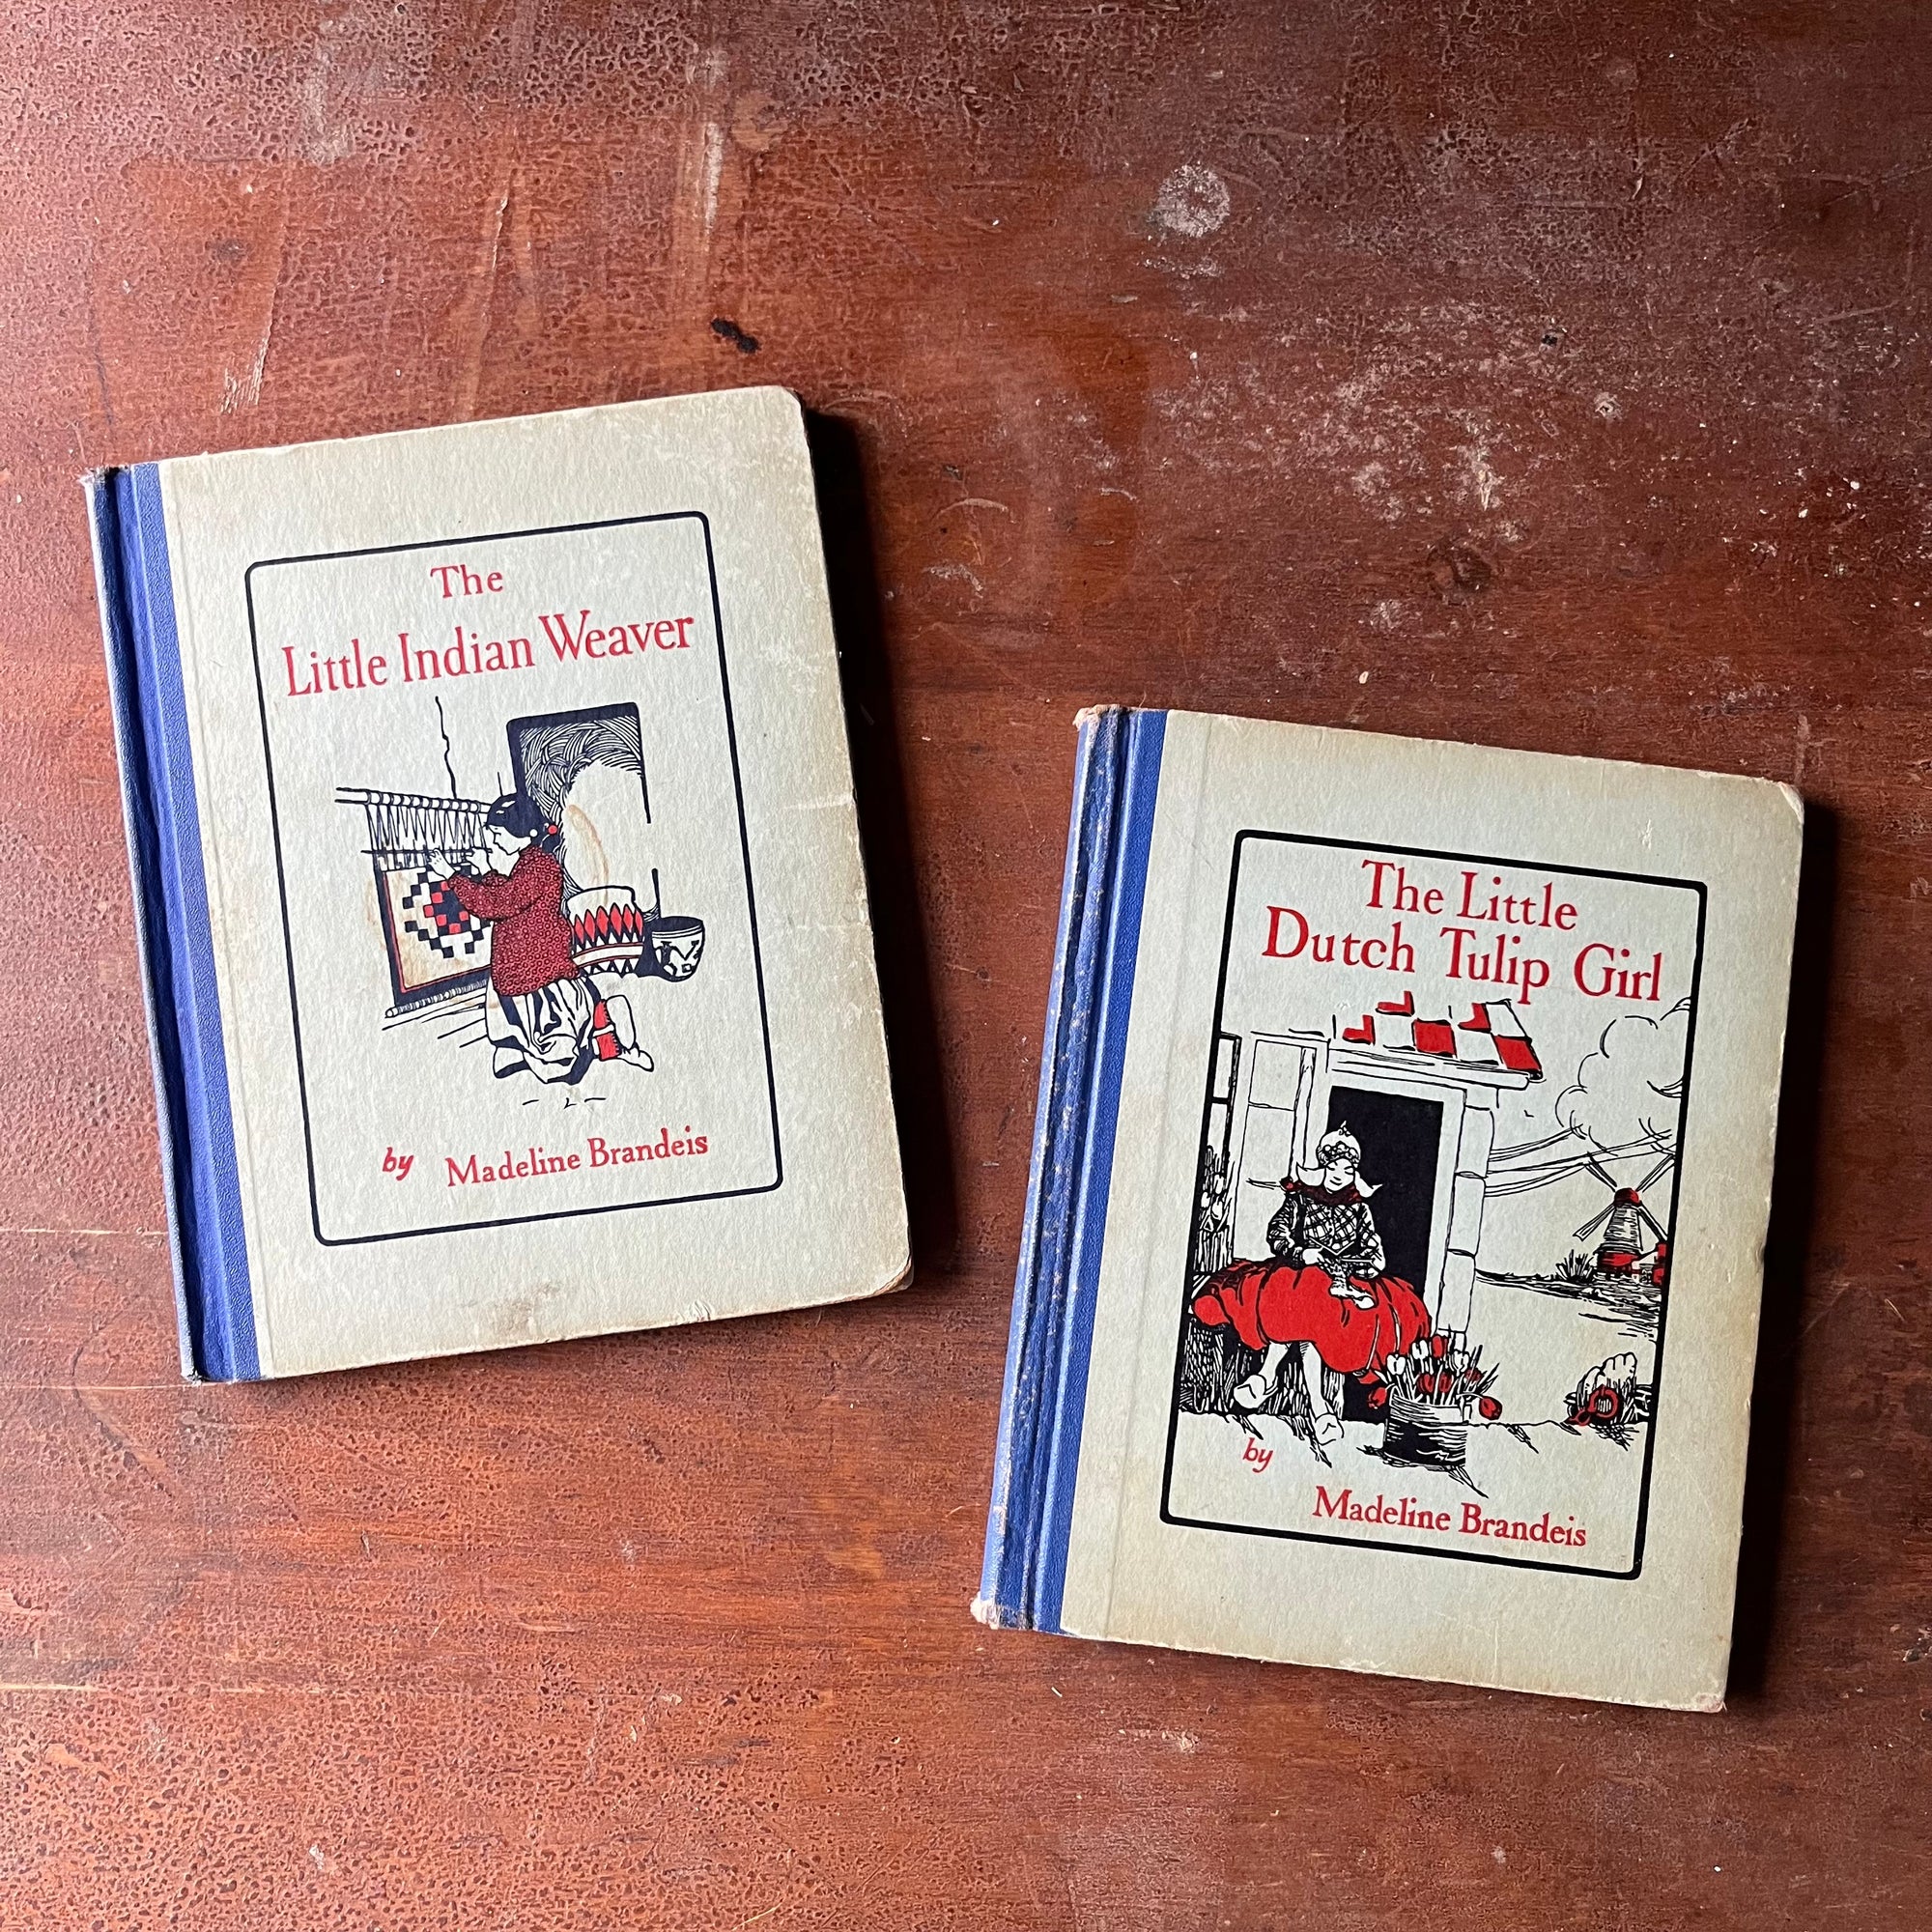 vintage non-fiction for children - The Children of All Lands Stories-The Little Indian Weaver & The Little Dutch Girl written by Madeline Brandeis - view of the front covers with illustrations in black & red